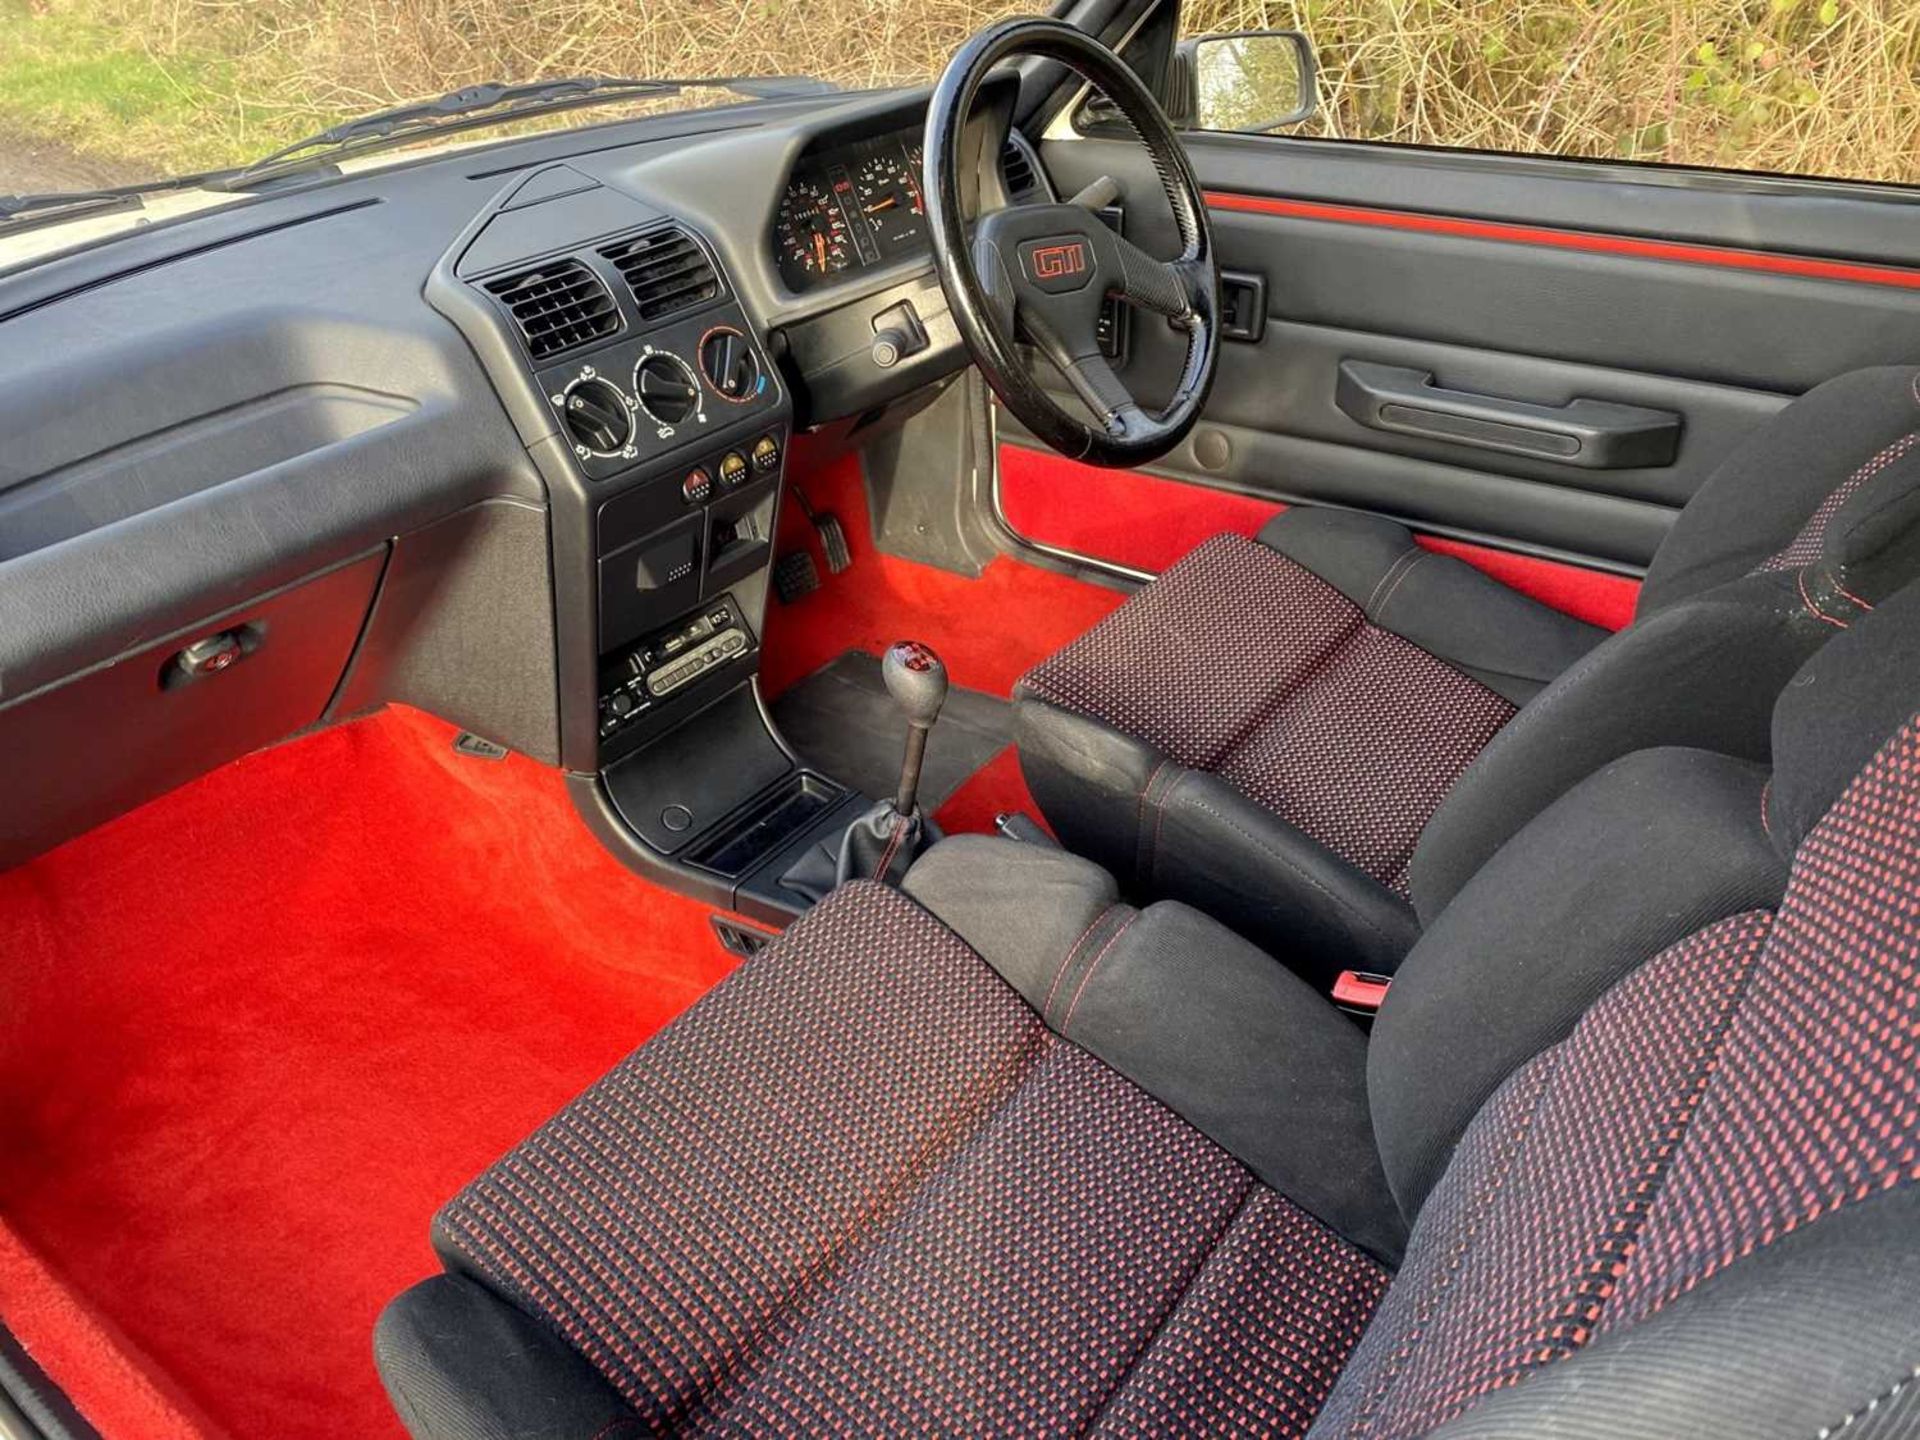 1990 Peugeot 205 GTi 1.6 Only 56,000 miles, same owner for 16 years - Image 34 of 81